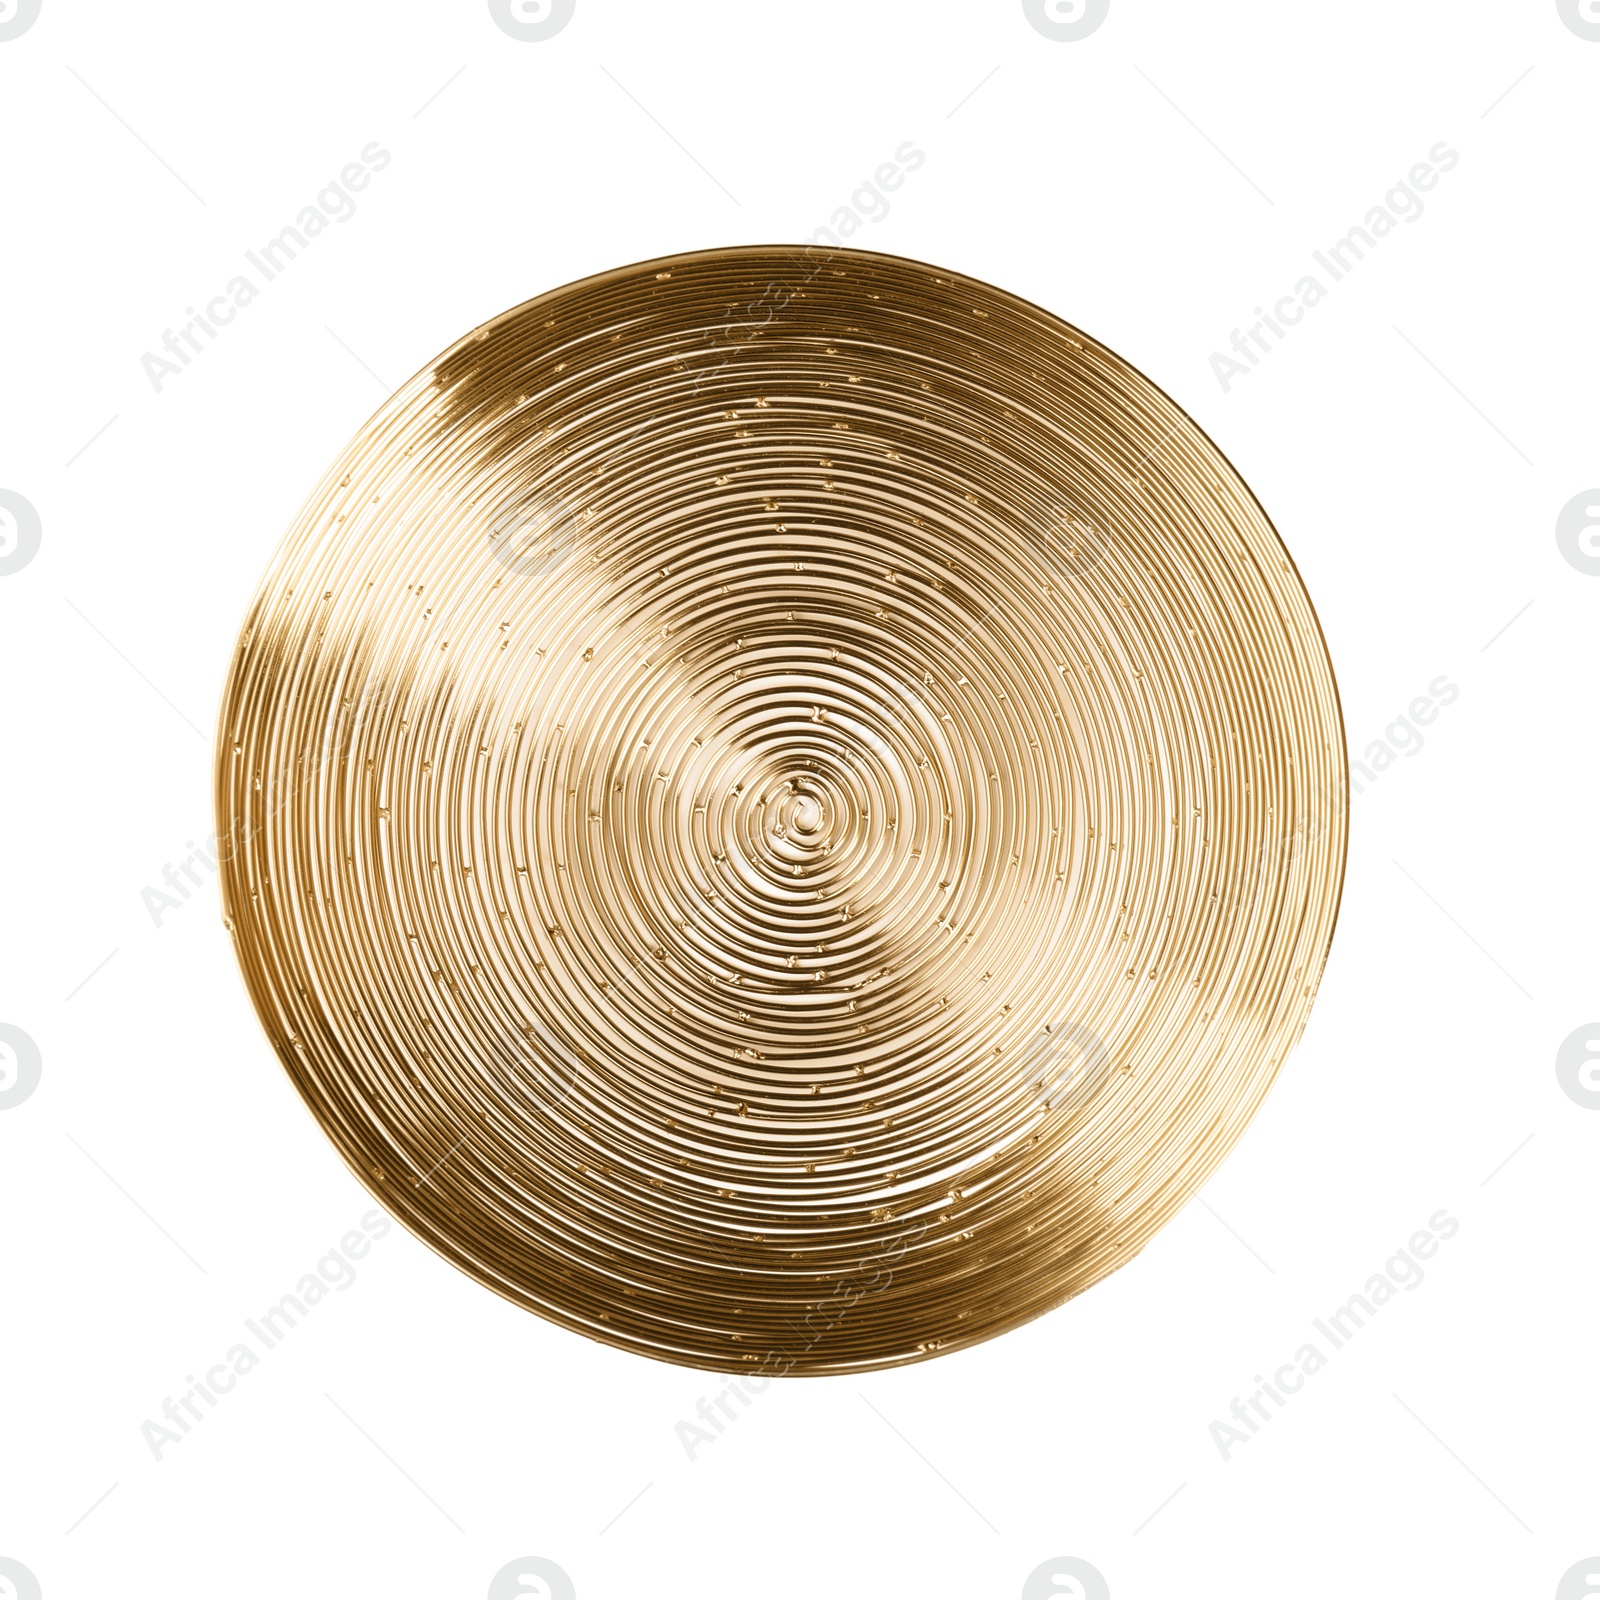 Photo of Shiny stylish metal bowl isolated on white, top view